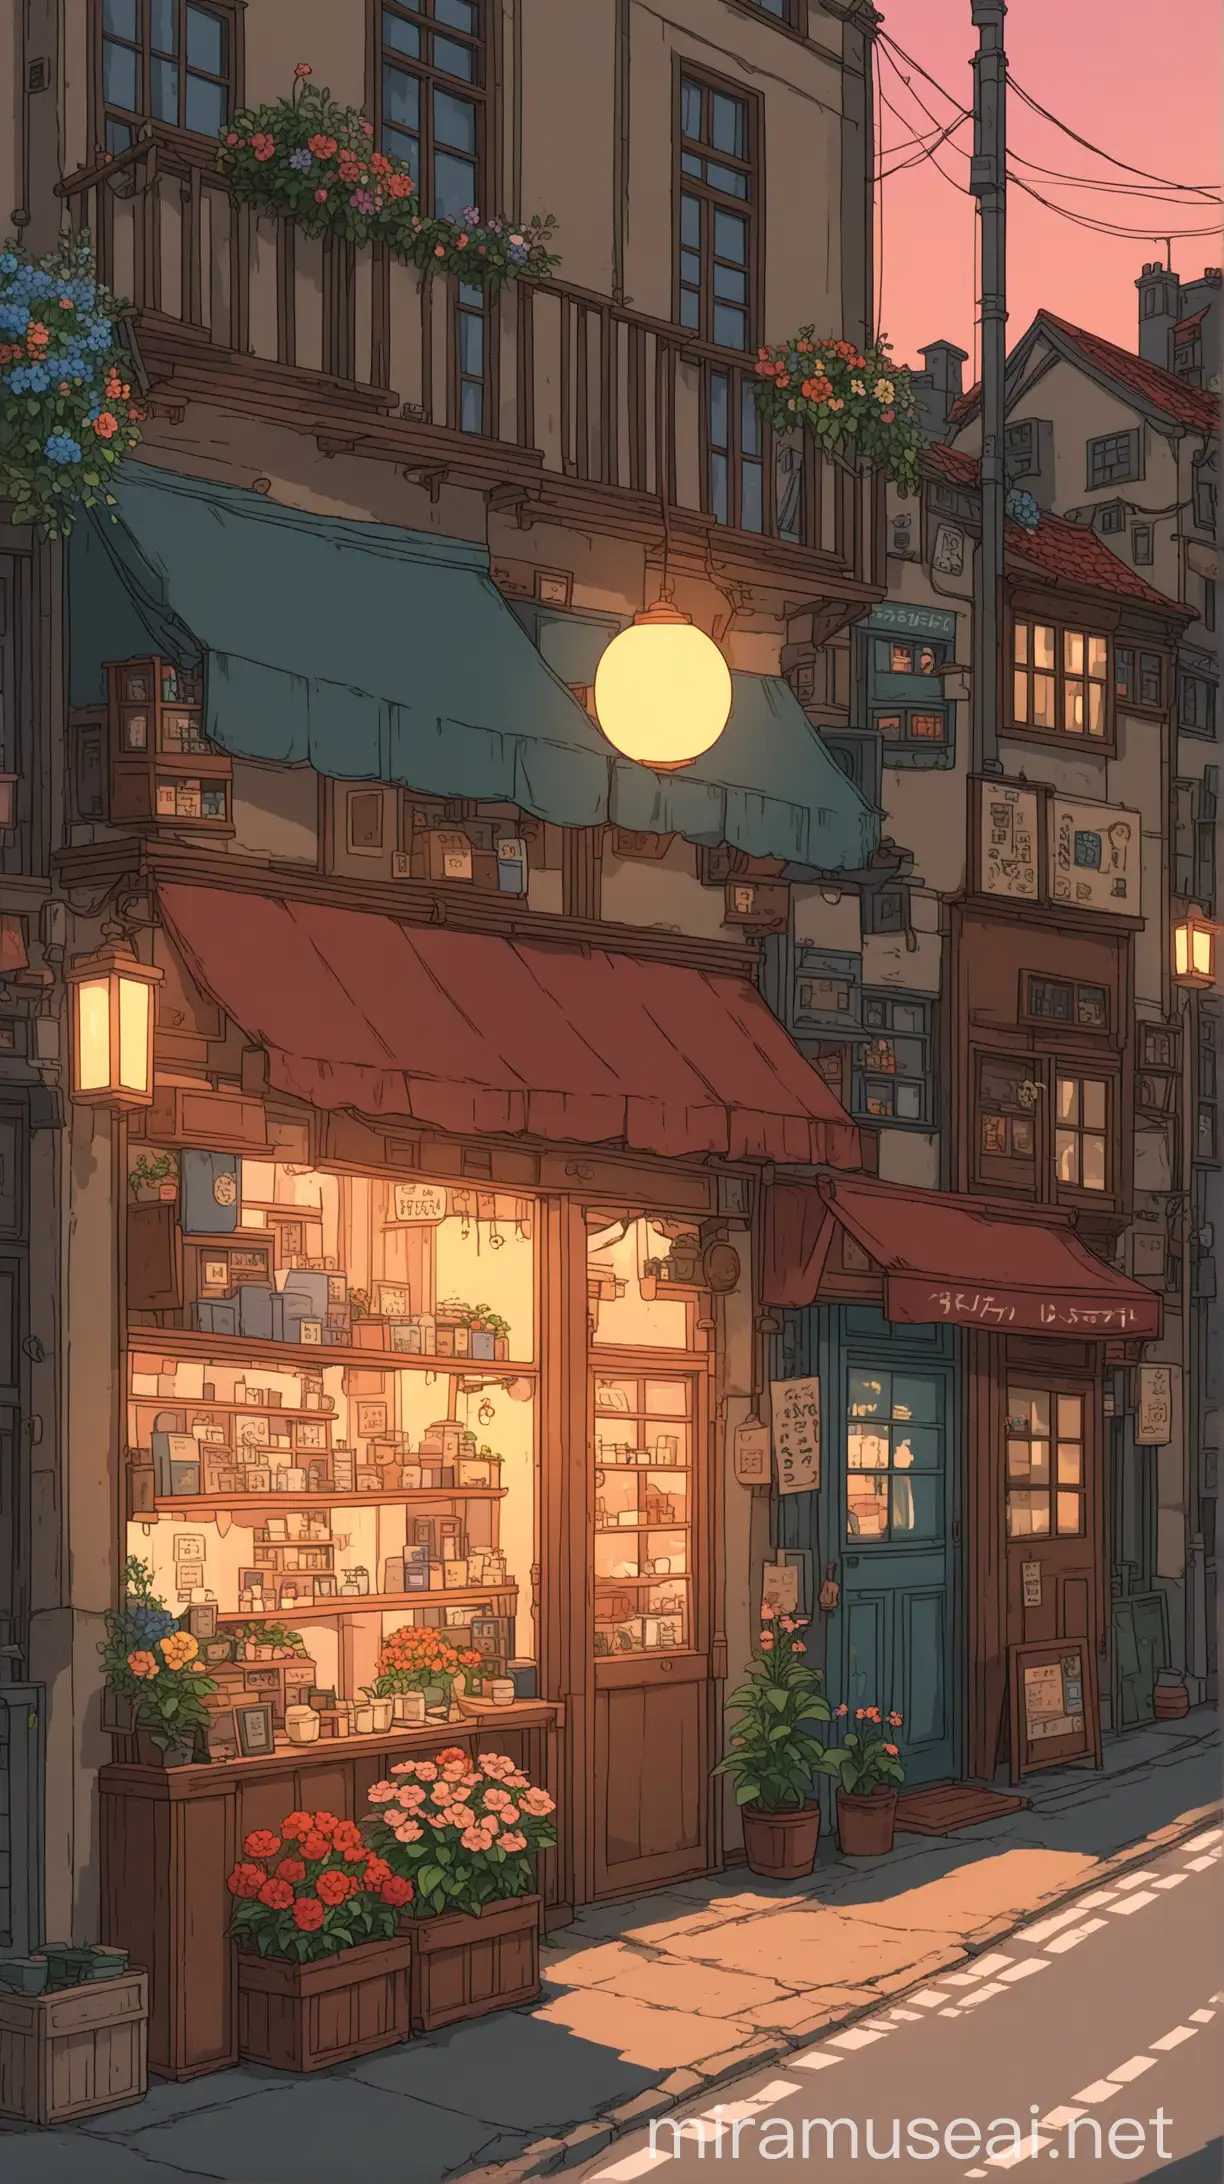 Cozy Evening in Anime Style GhibliInspired Street with Flower Shop